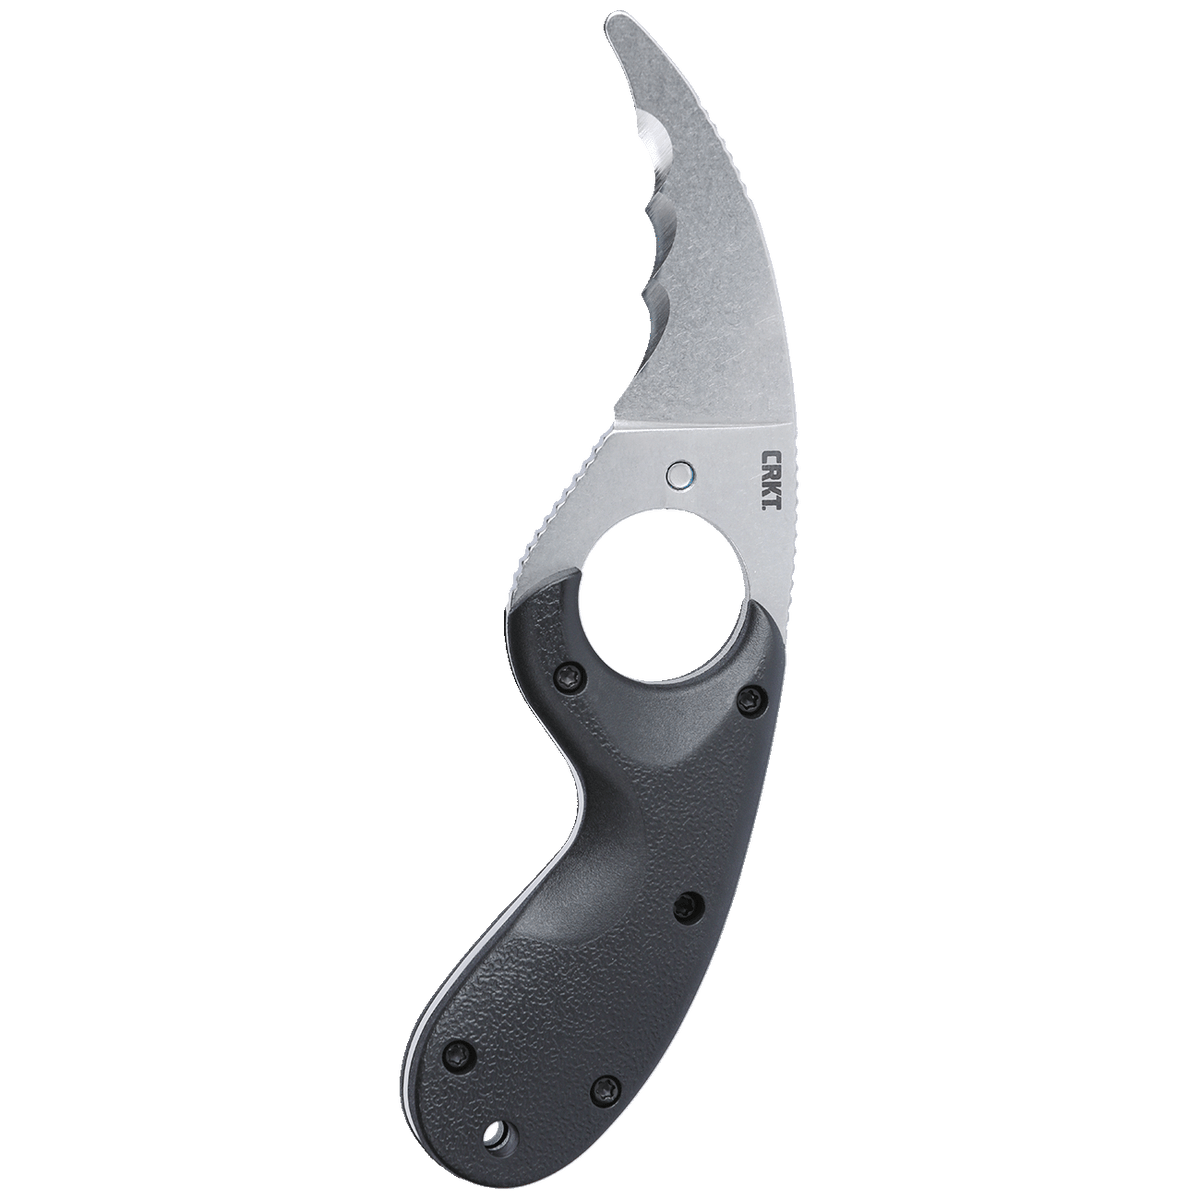 The CRKT Bear Claw Knife, a fixed blade knife featuring corrosion-resistant steel, showcases a black handle on a black background.